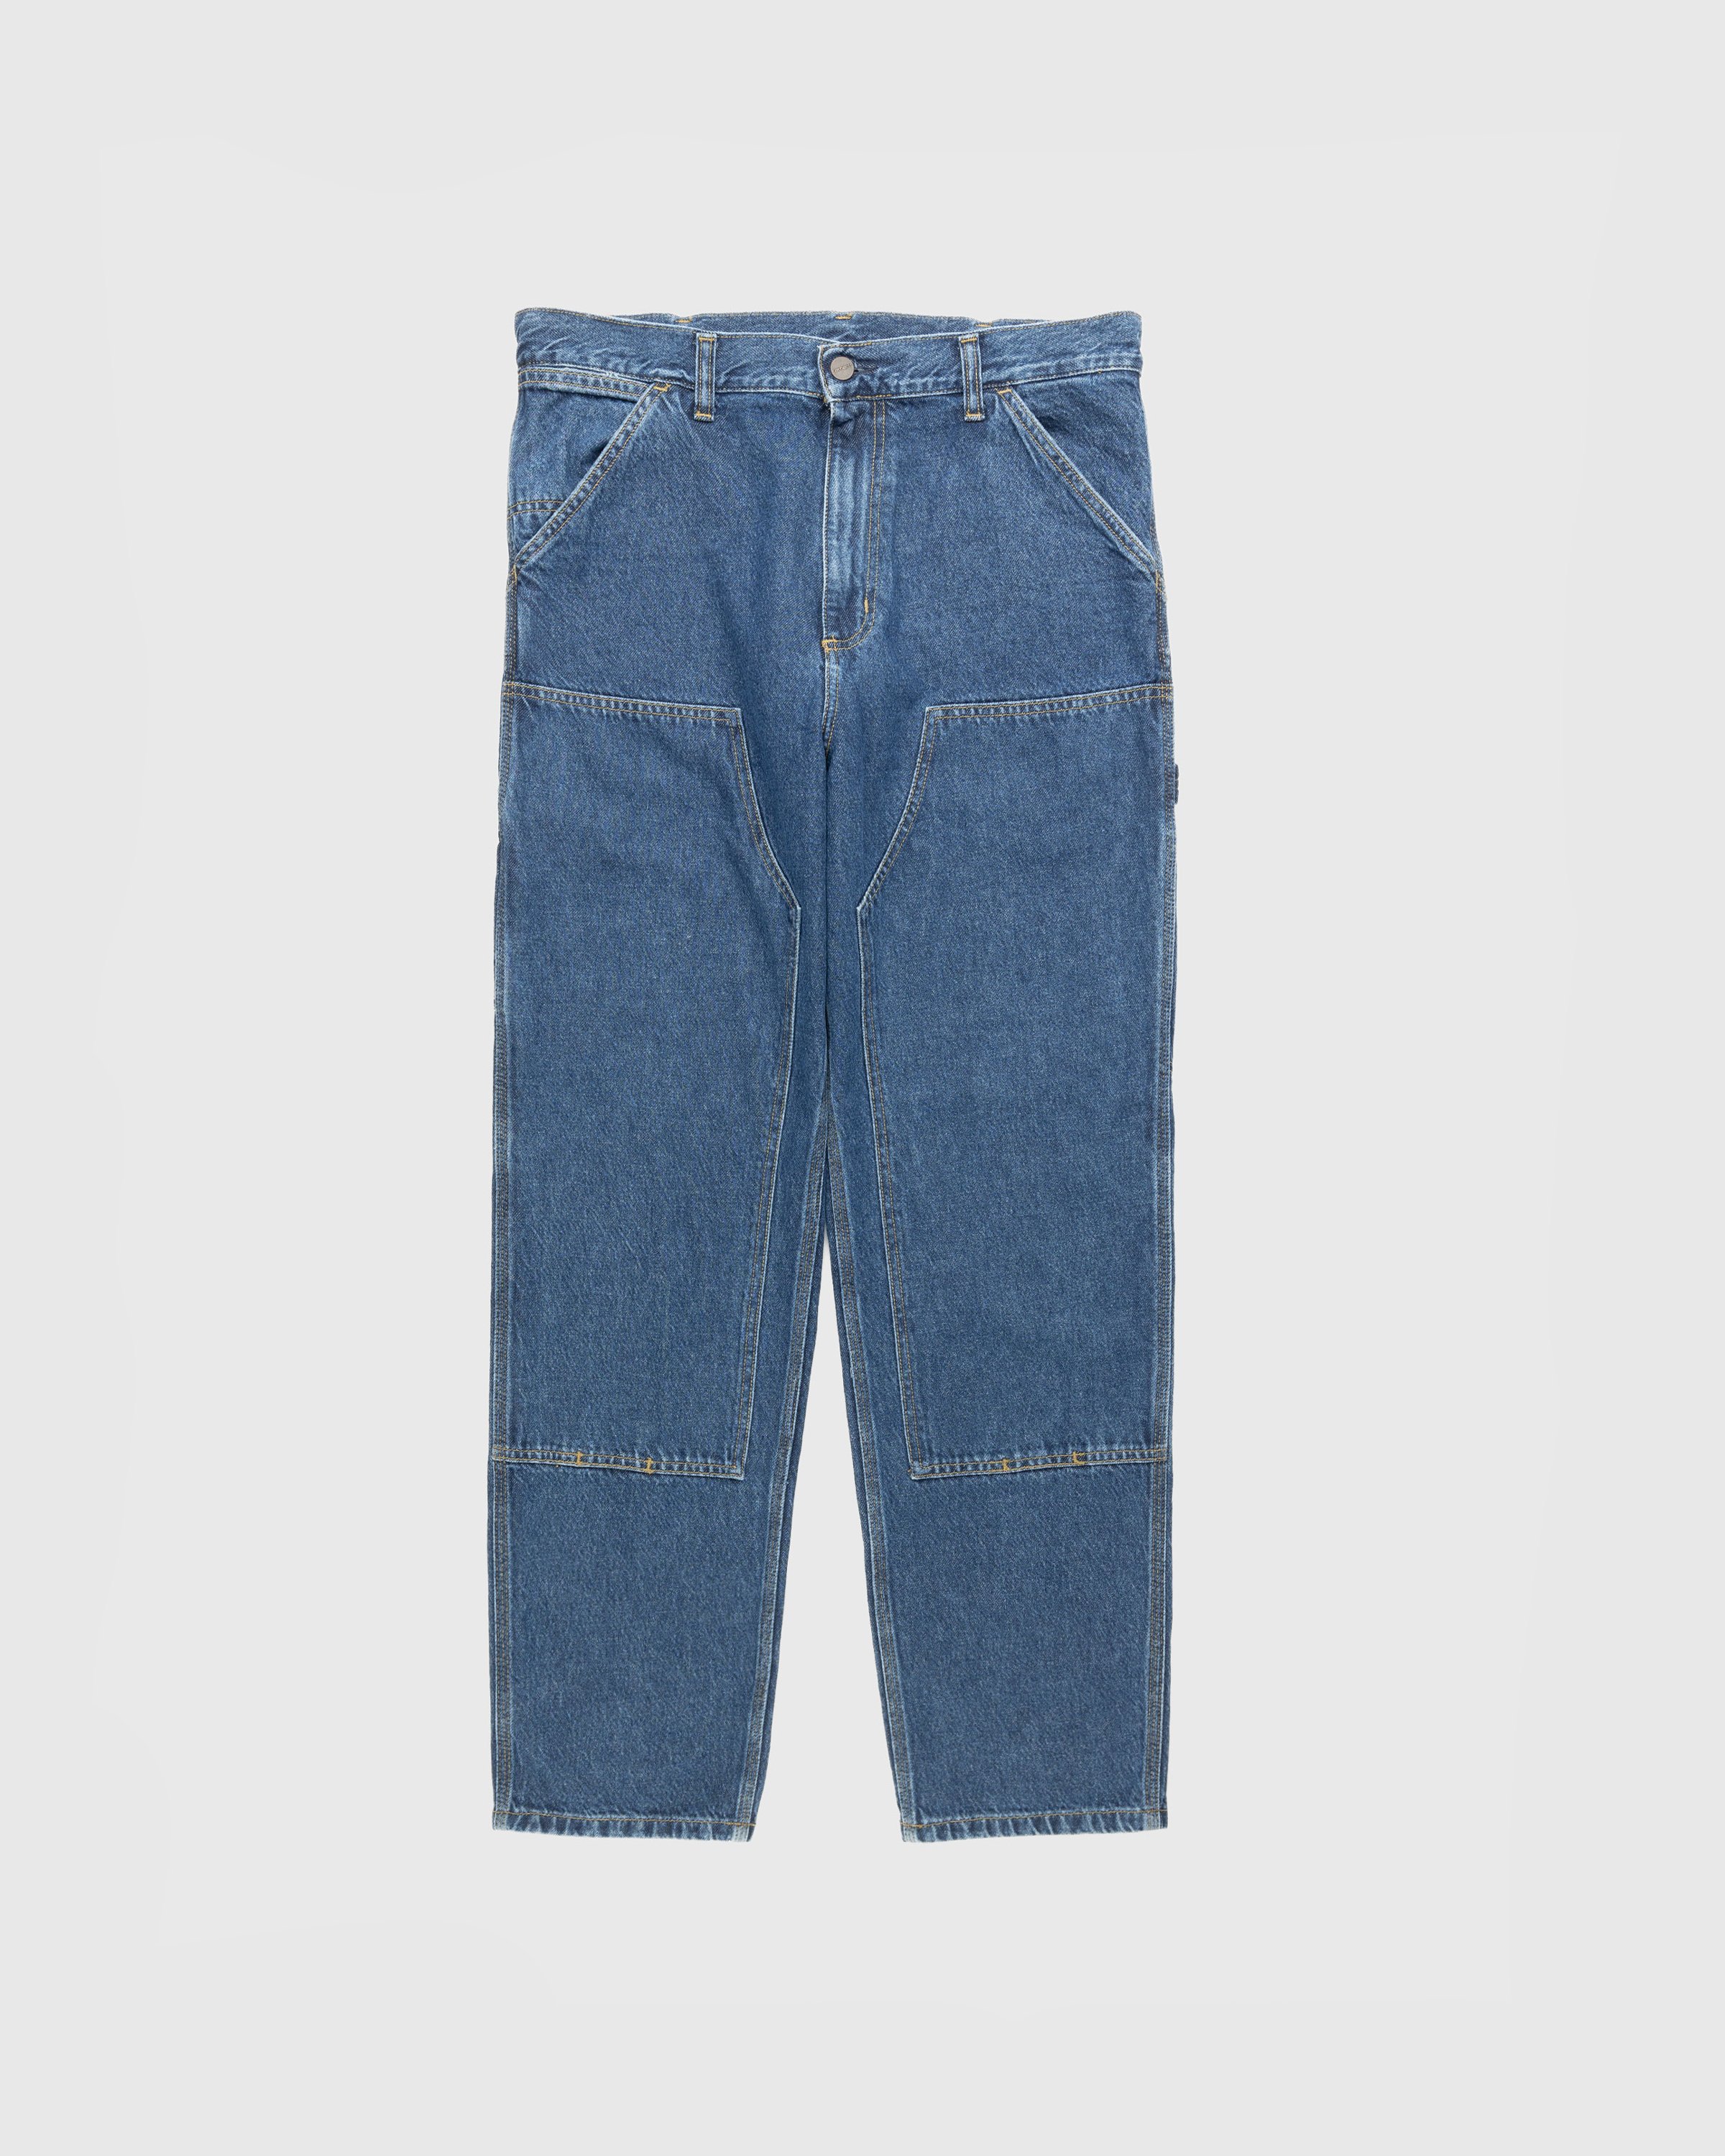 Carhartt WIP - Double Knee Pant Blue - Clothing - Blue - Image 1